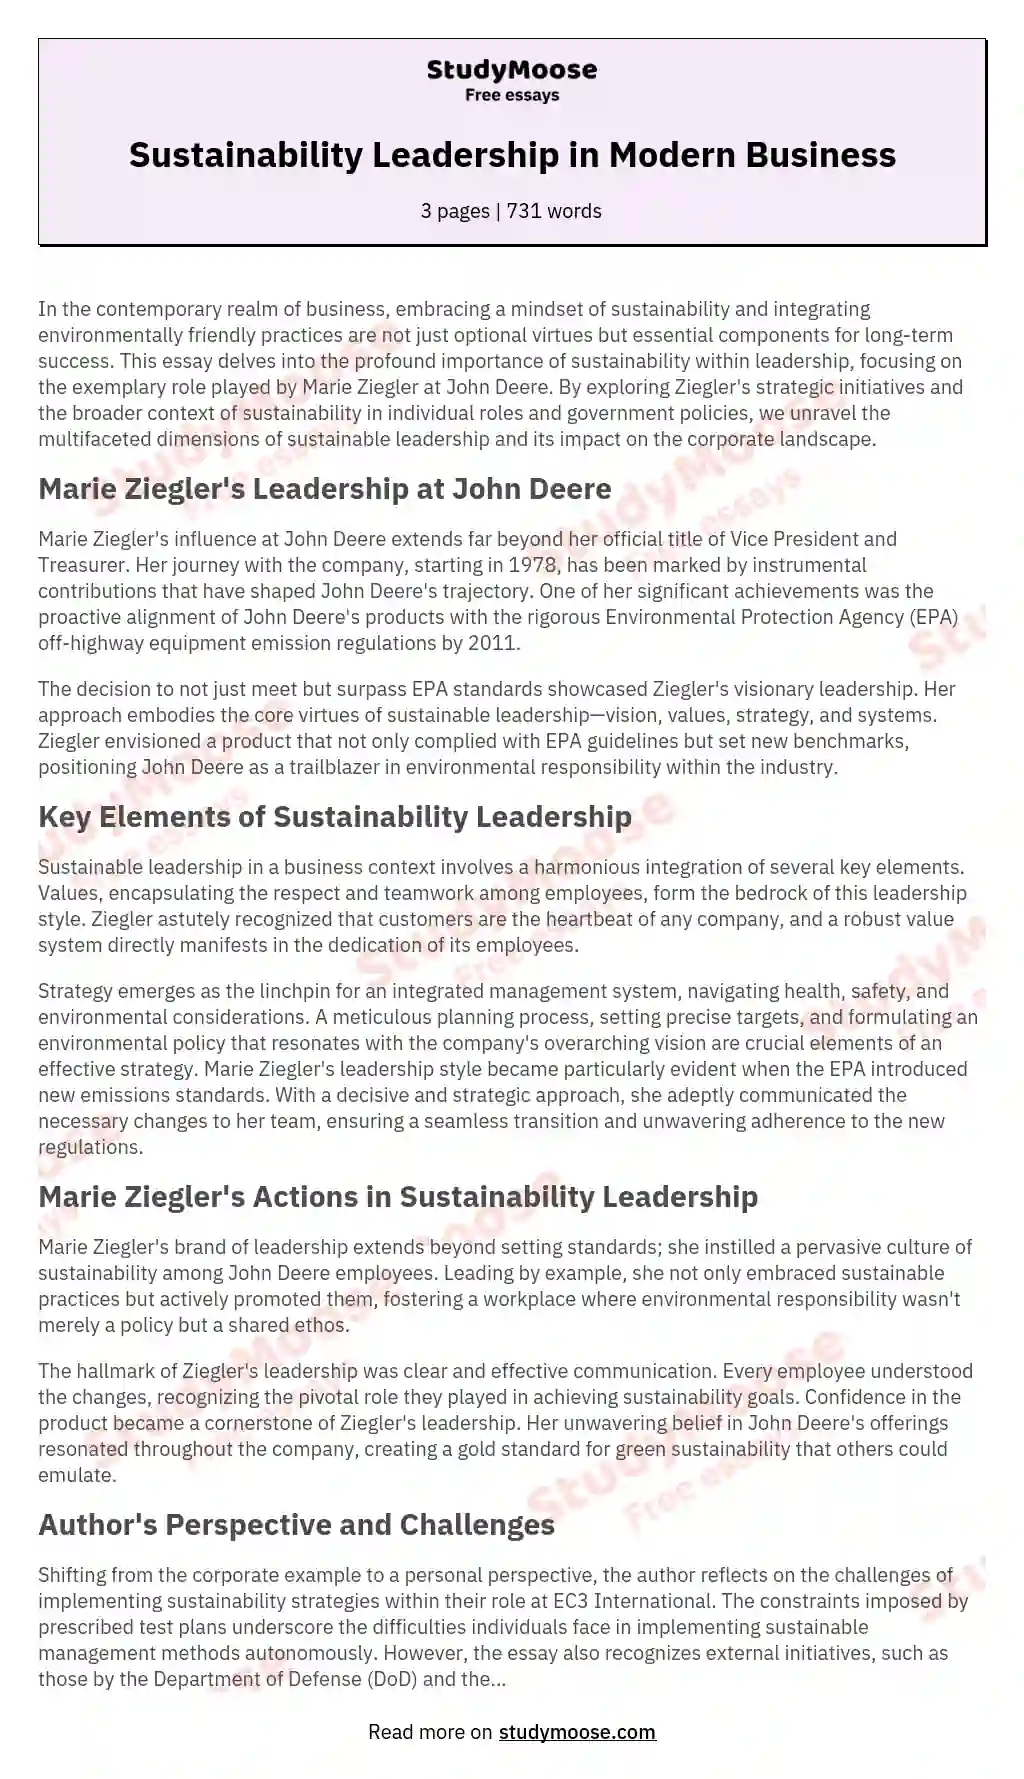 Sustainability Leadership in Modern Business essay